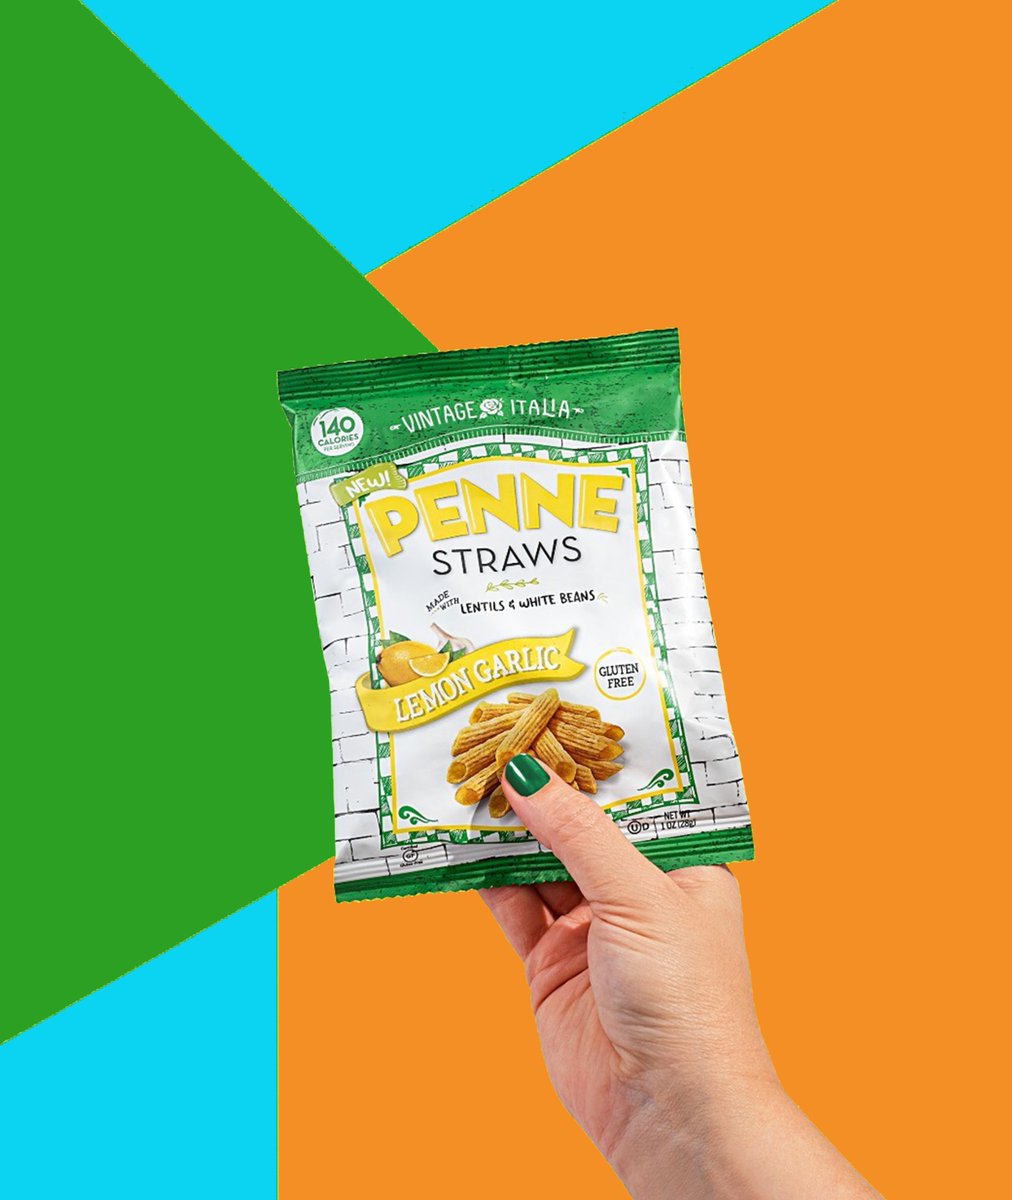 Craving a snack with a kick? Look no further! Lemon Garlic pasta snacks will keep you snacking happy. 😋 Get ready to satisfy those taste buds! #SnackZest #LemonGarlicCrunch #eatpastasnacks #pastasnacks 🍋